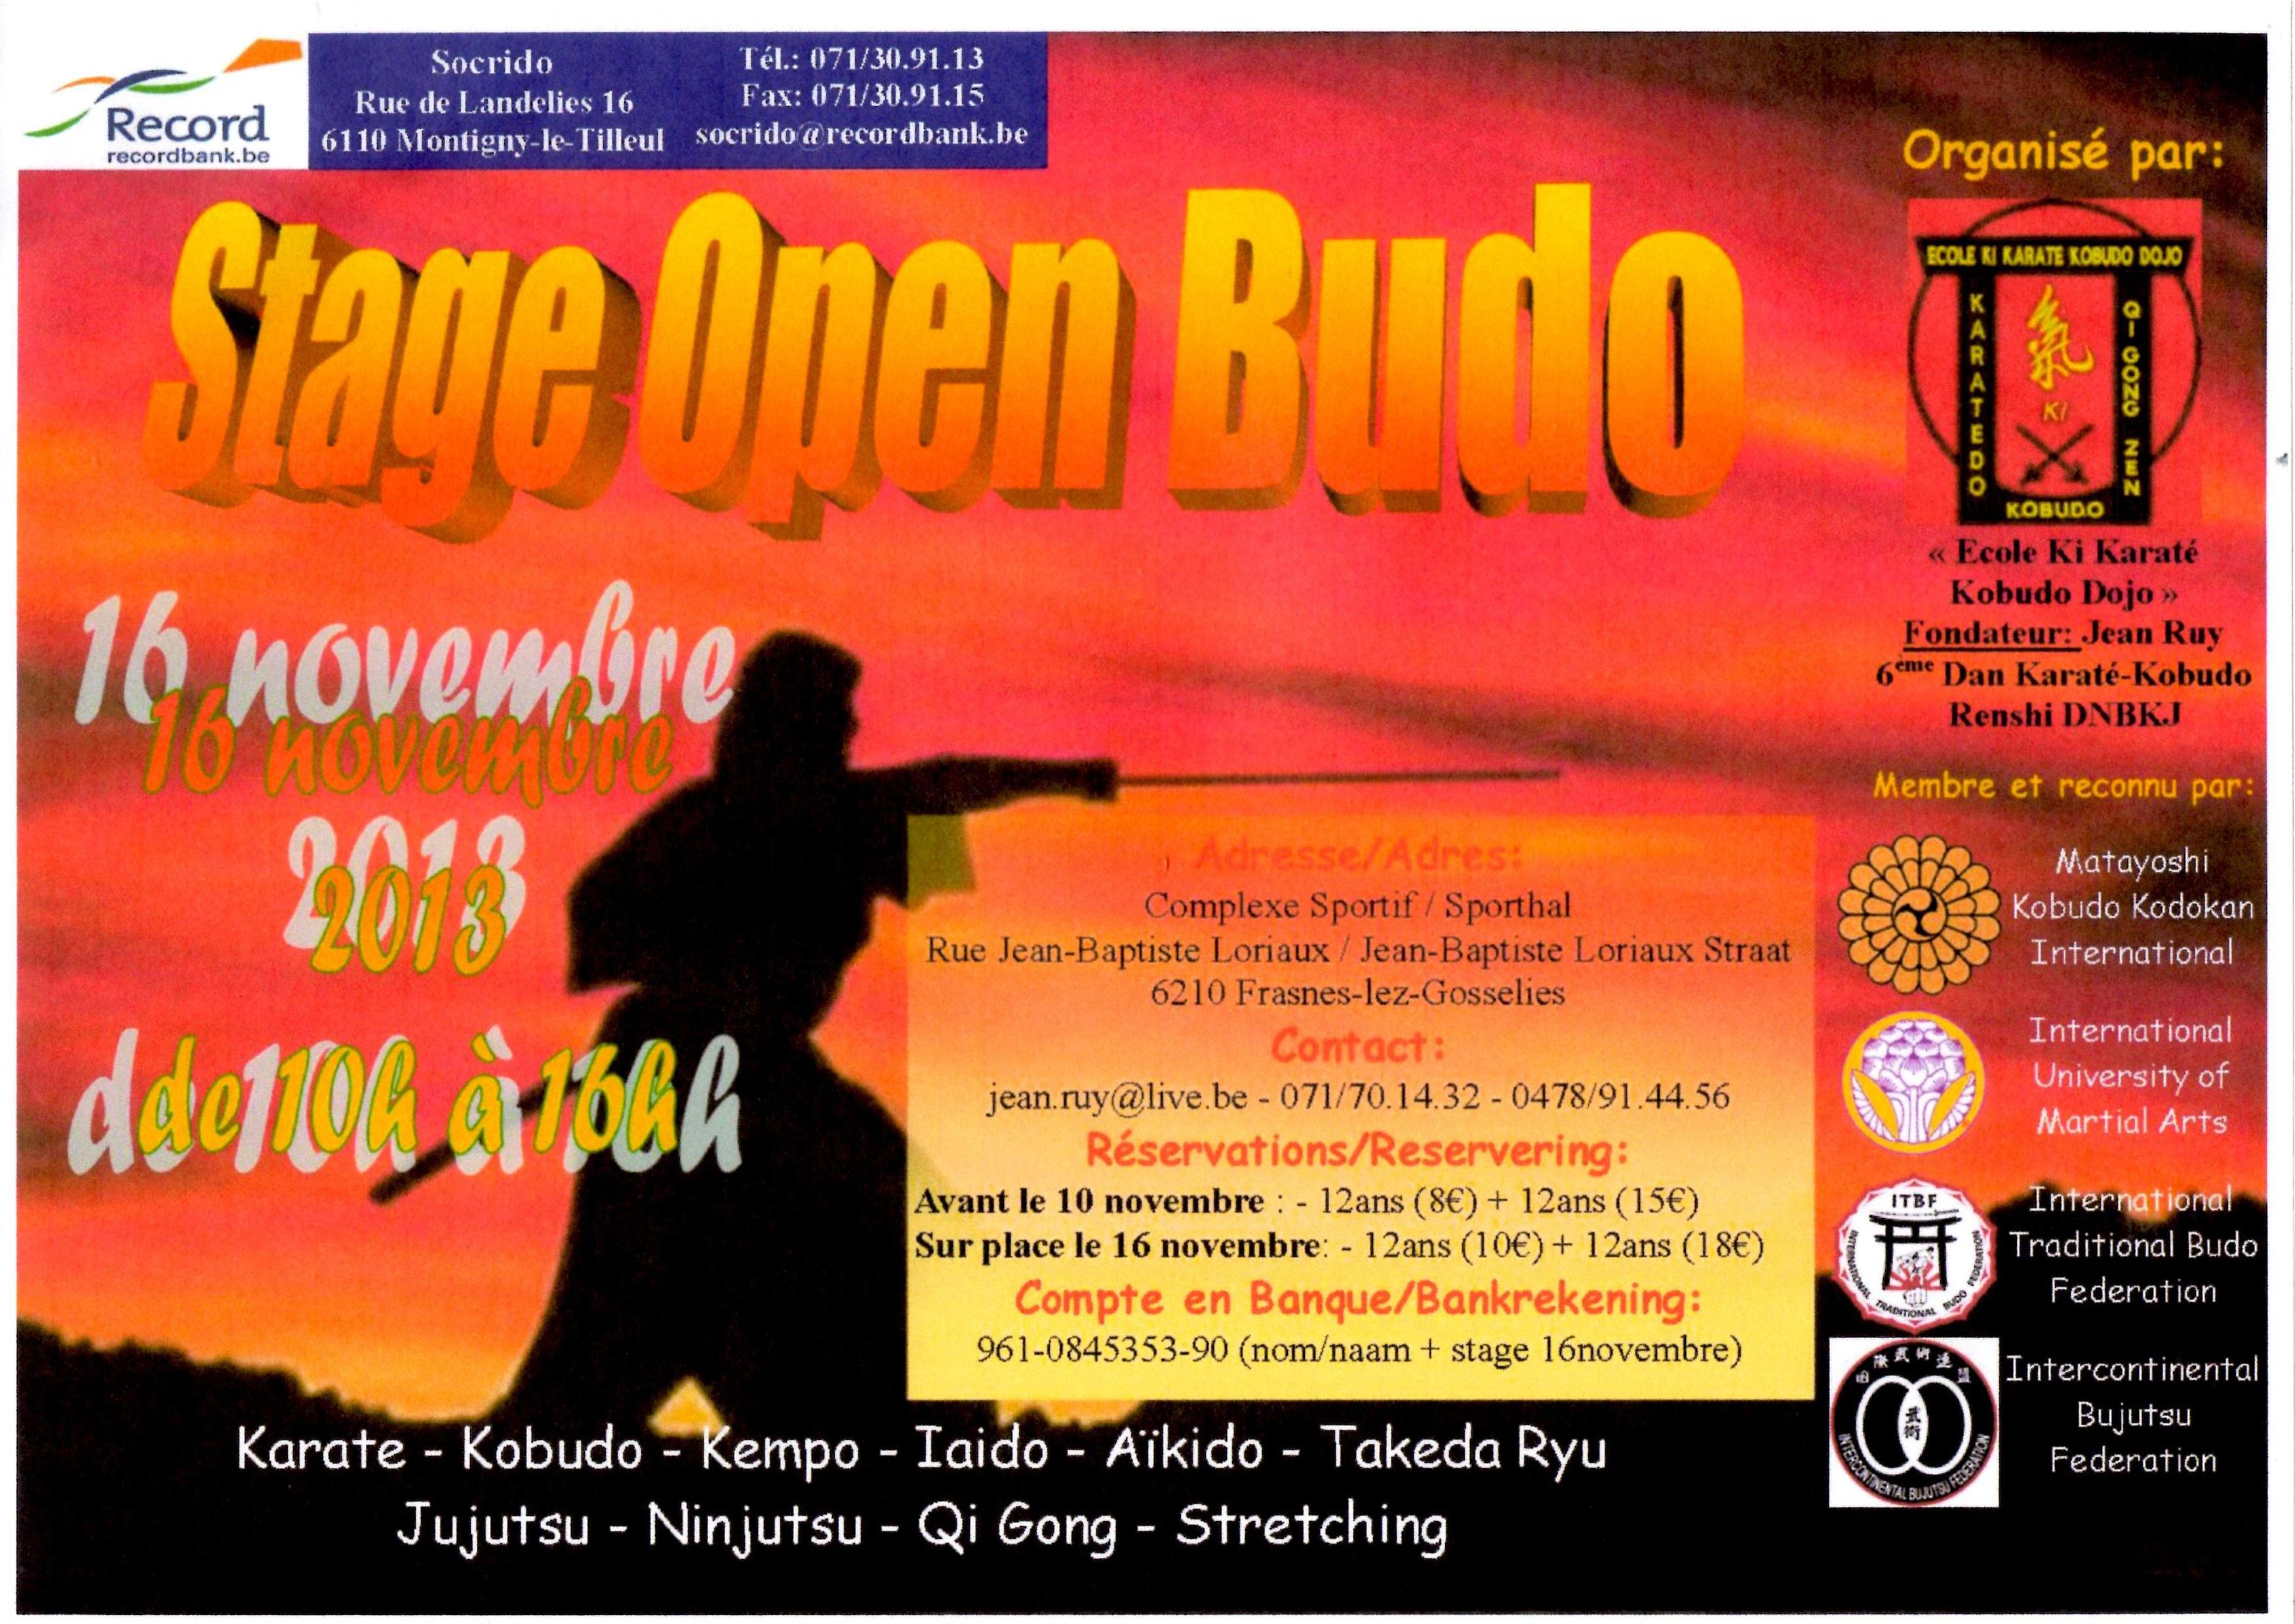 Stage Open Budo